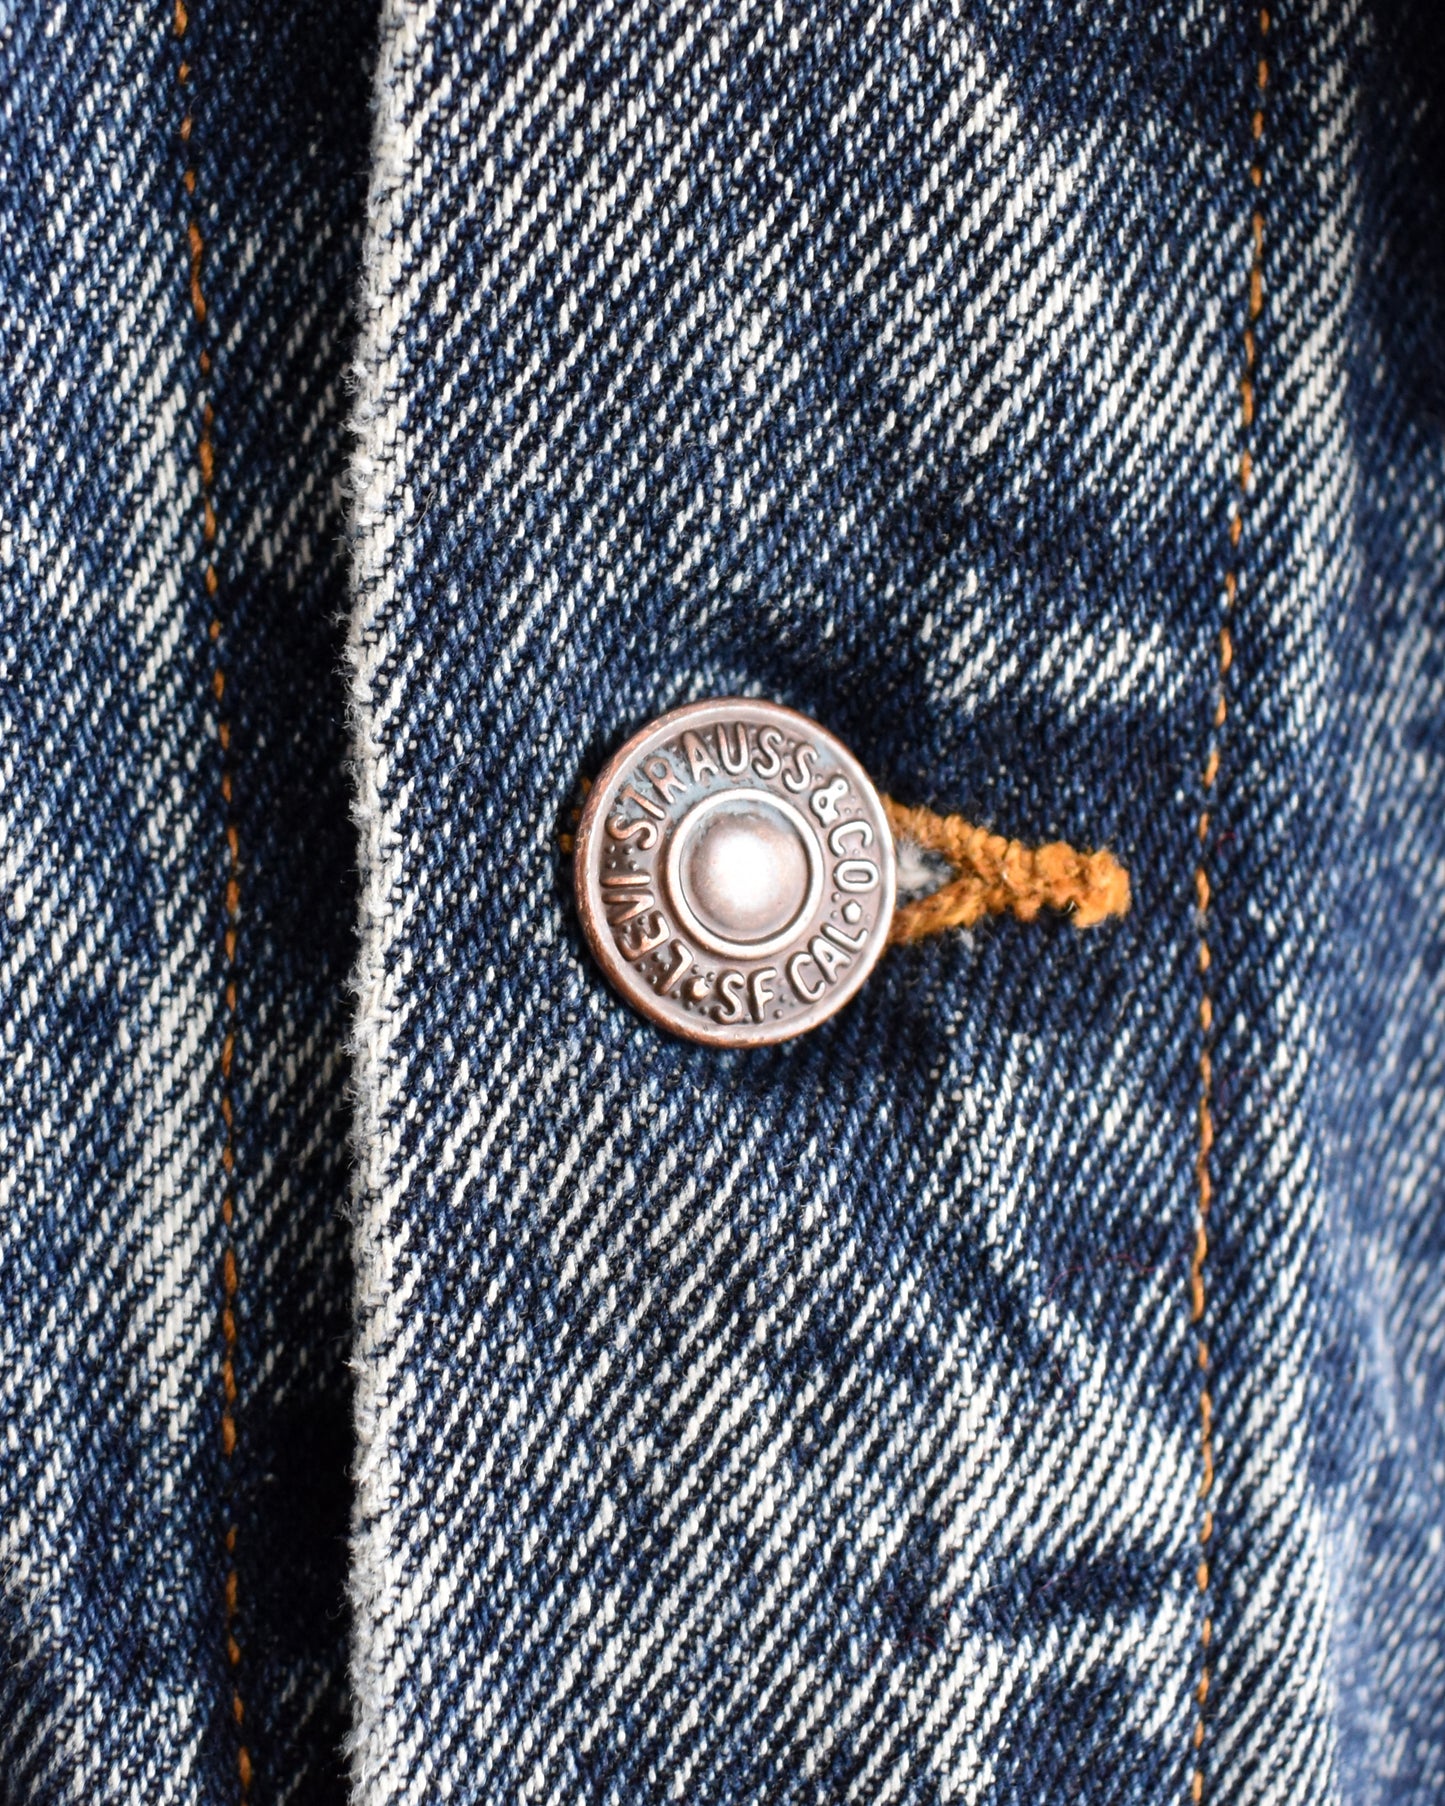 Close up of jacket button